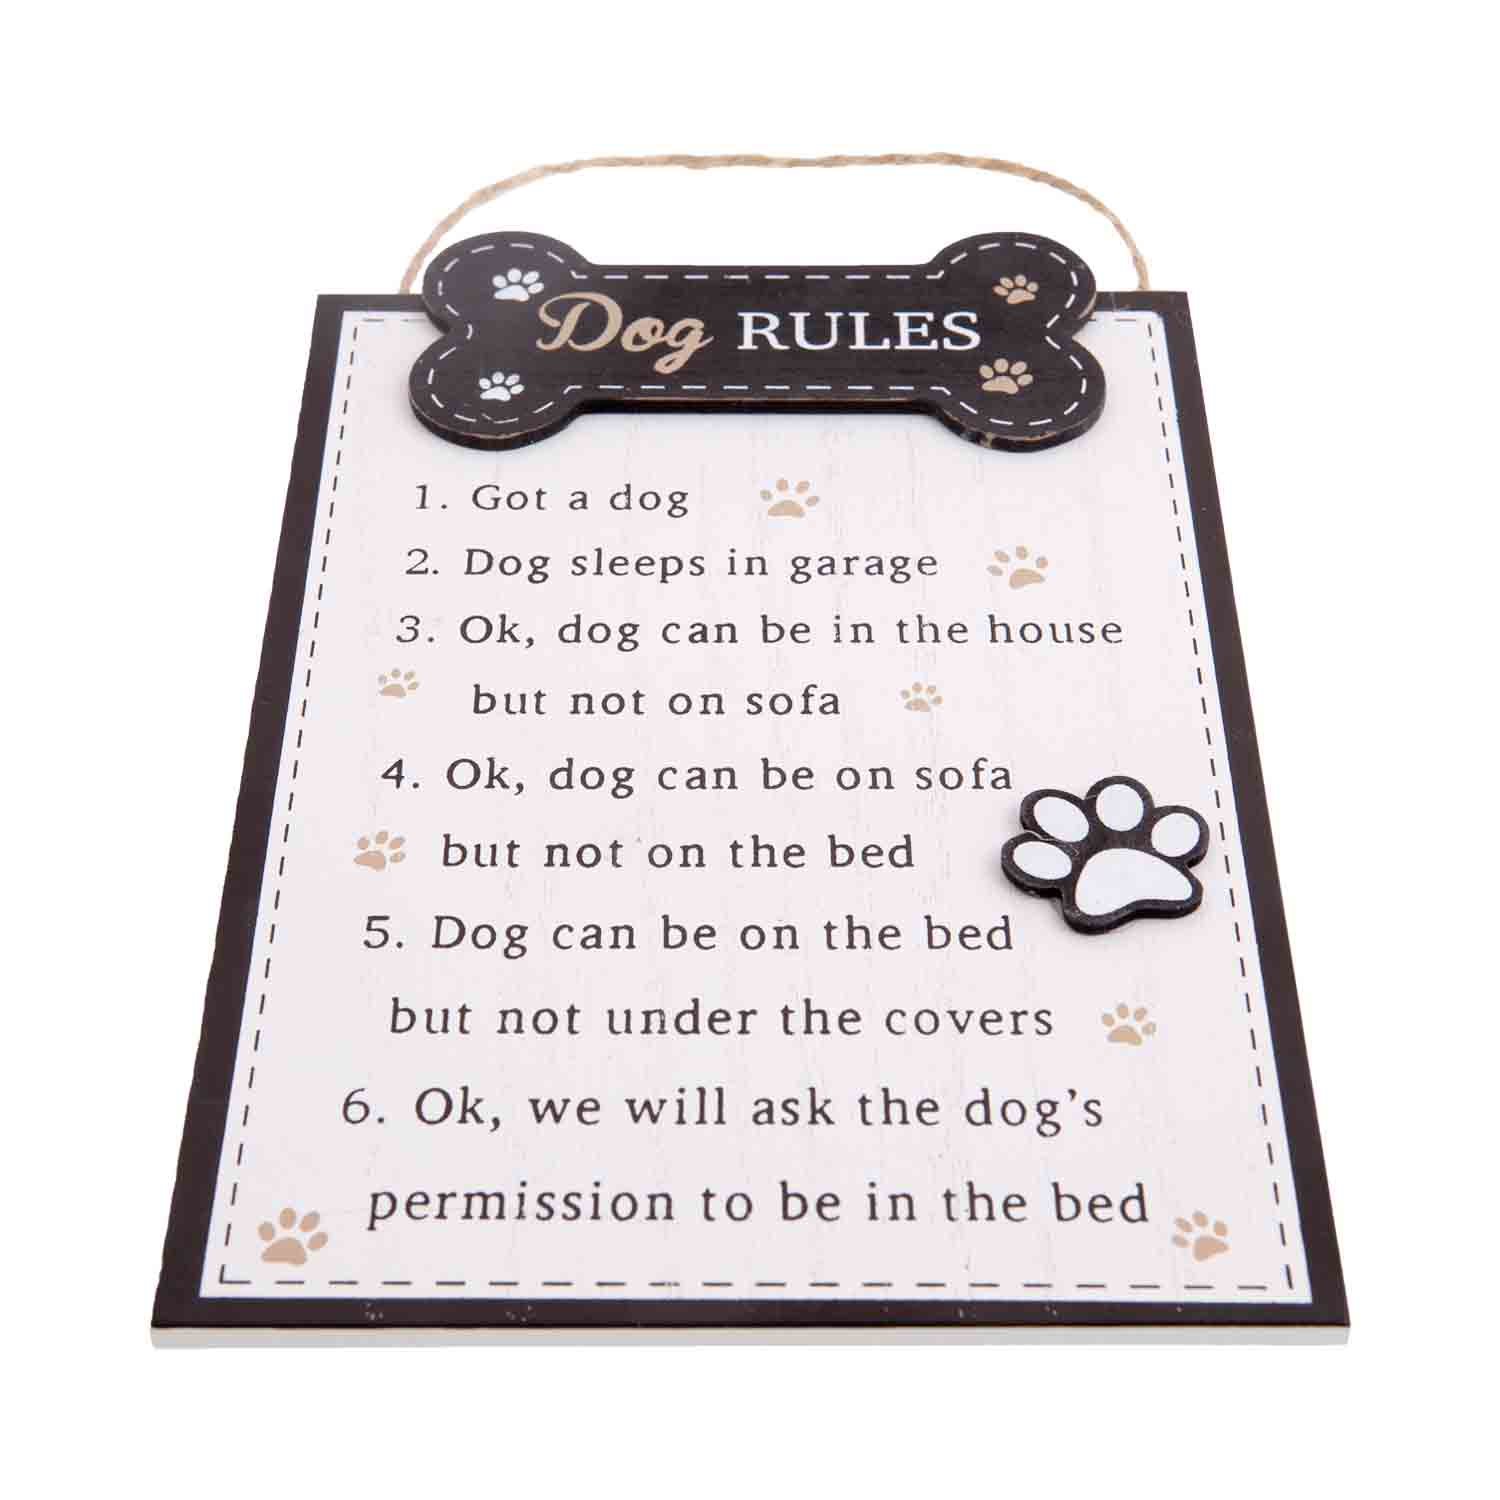 Dog Krazy Gifts - Dog Rules Plaque In White, The Real Rules Of Dog Ownership, Part Of The Wide Range of Dog Signs available from DogKrazyGifts.co.uk